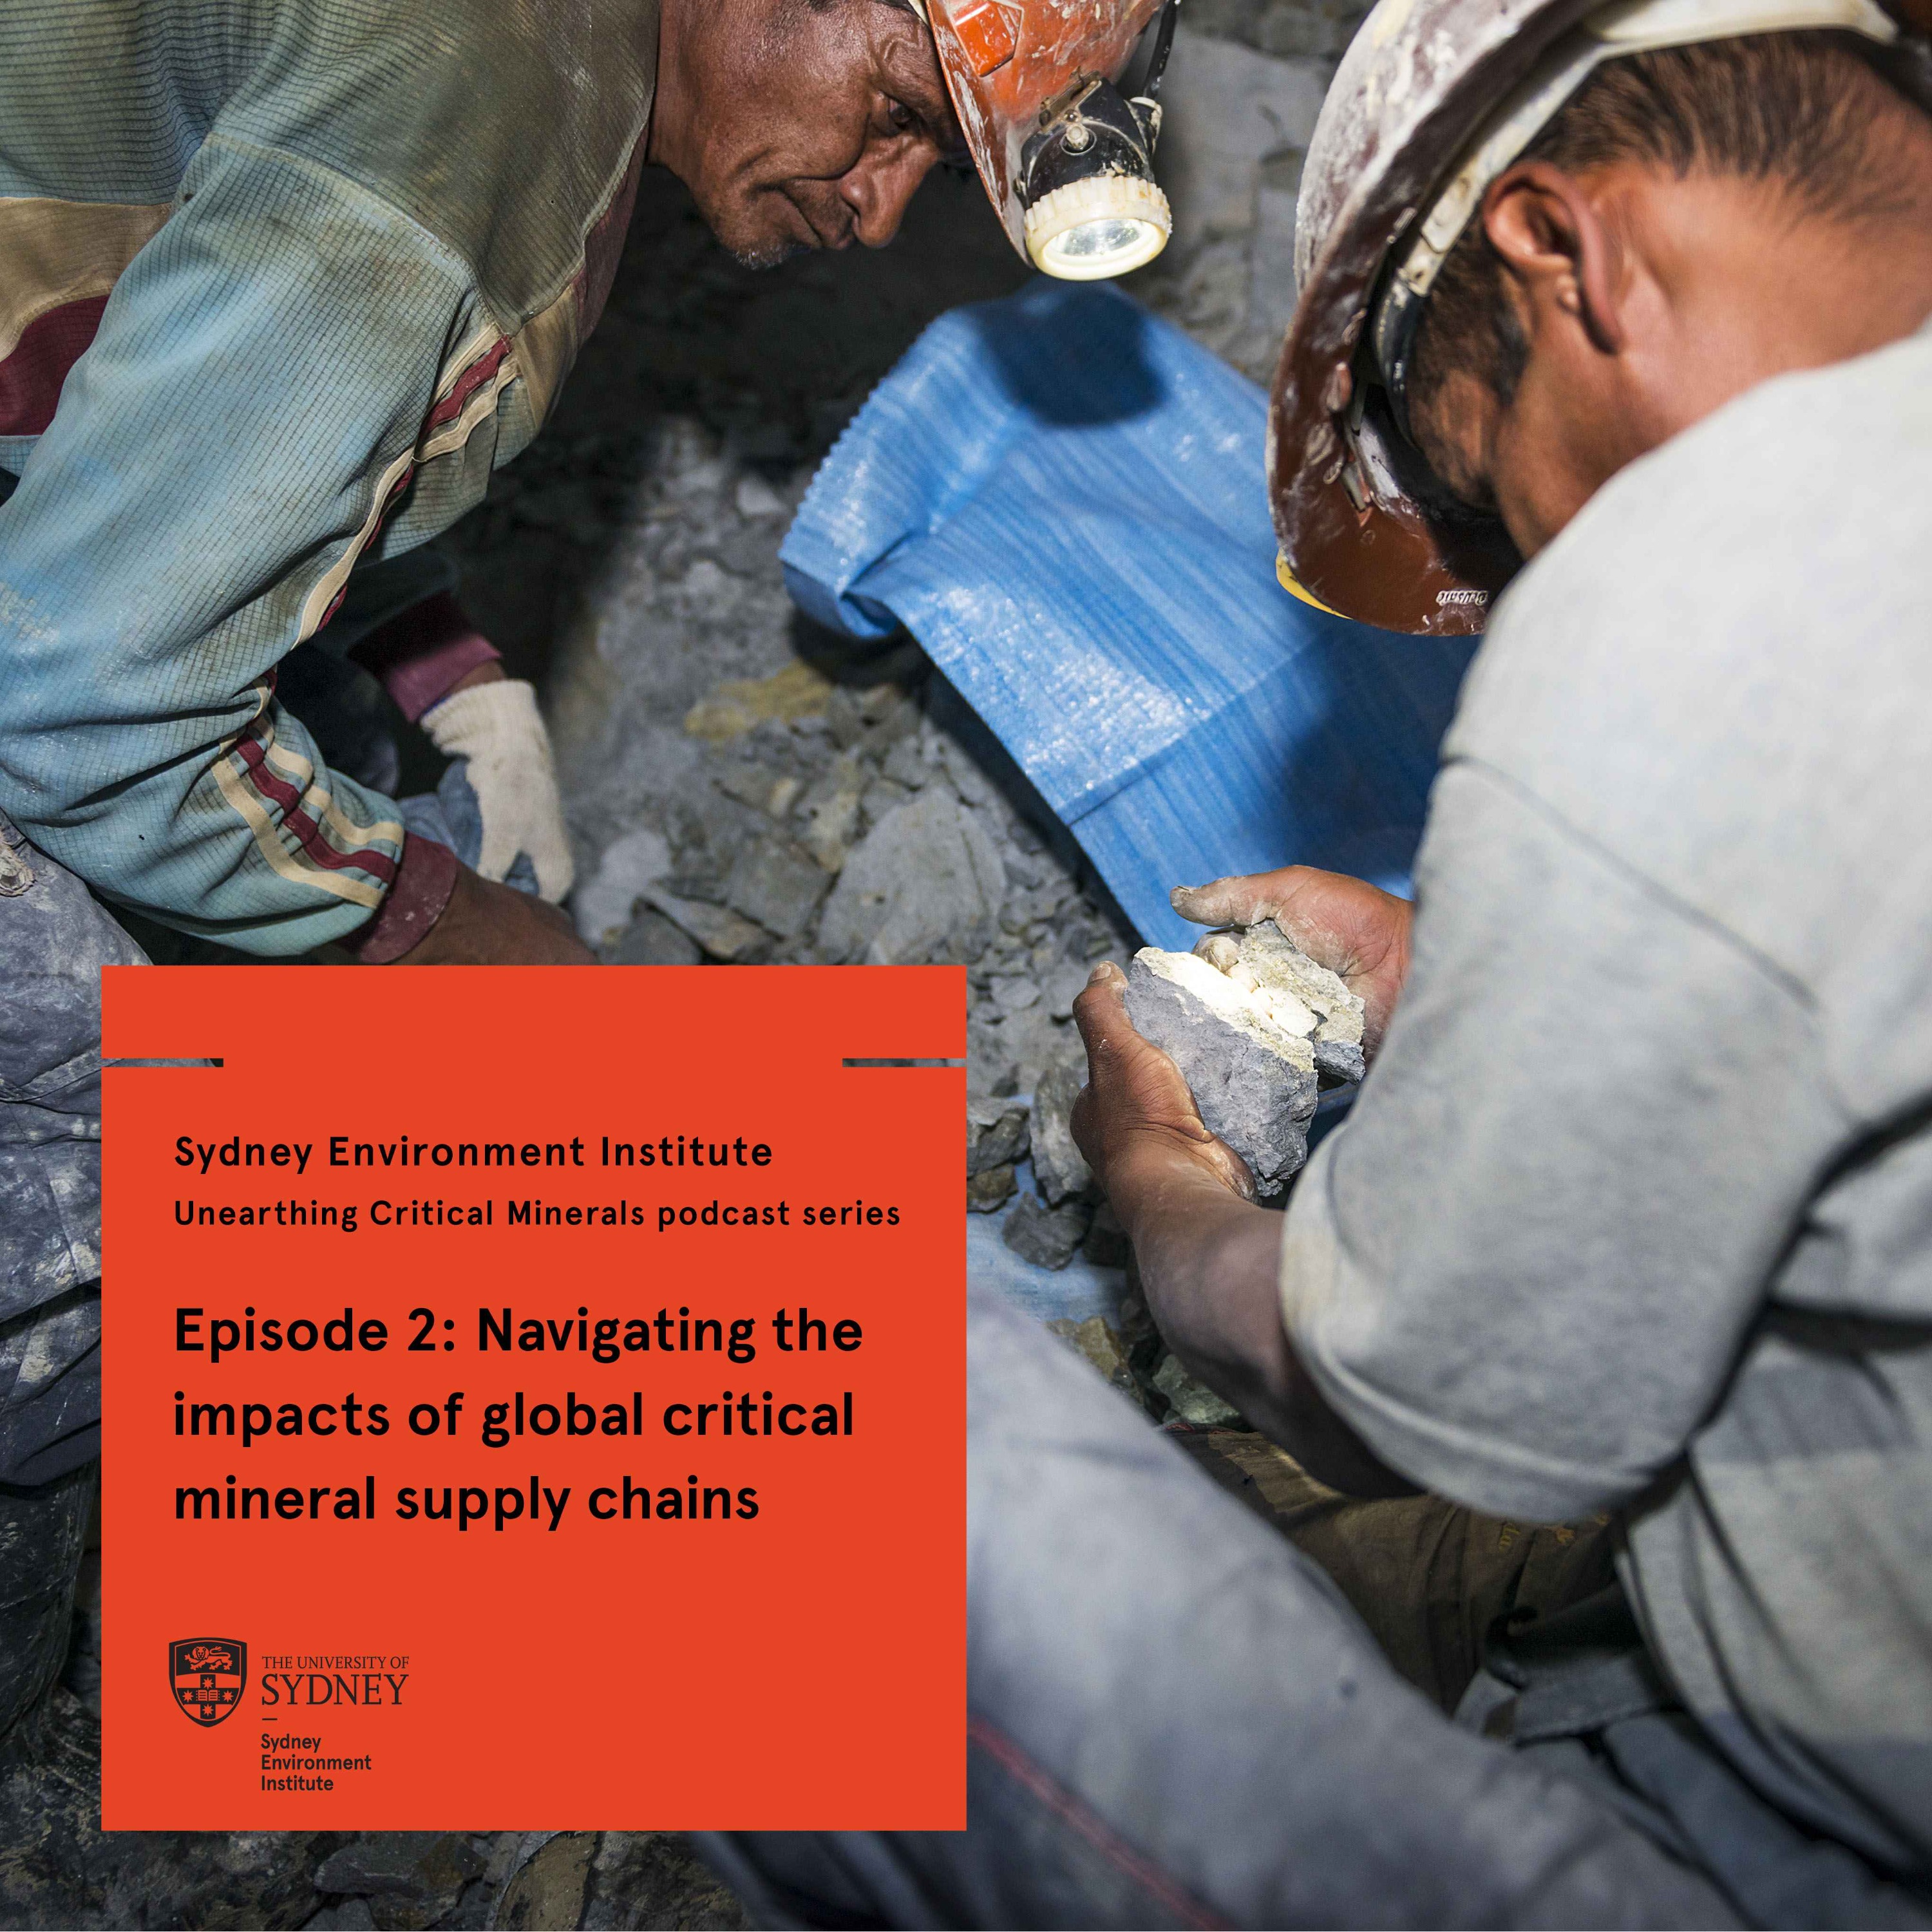 Episode 2: Navigating the impacts of global critical mineral supply chains